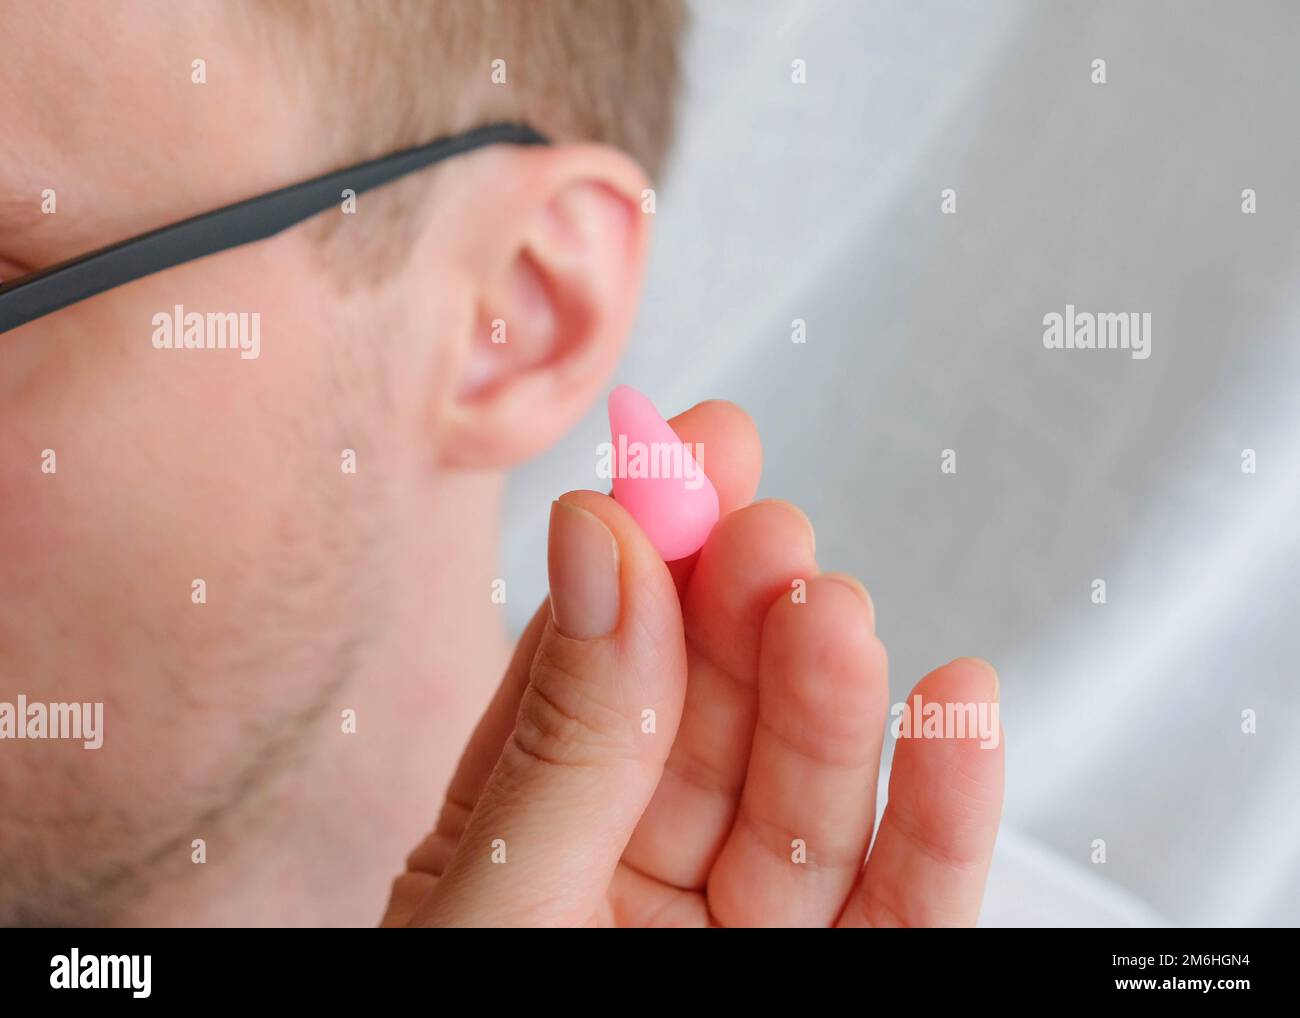 Holds a pink wax earplug in his hand. Human ear in the background Stock Photo